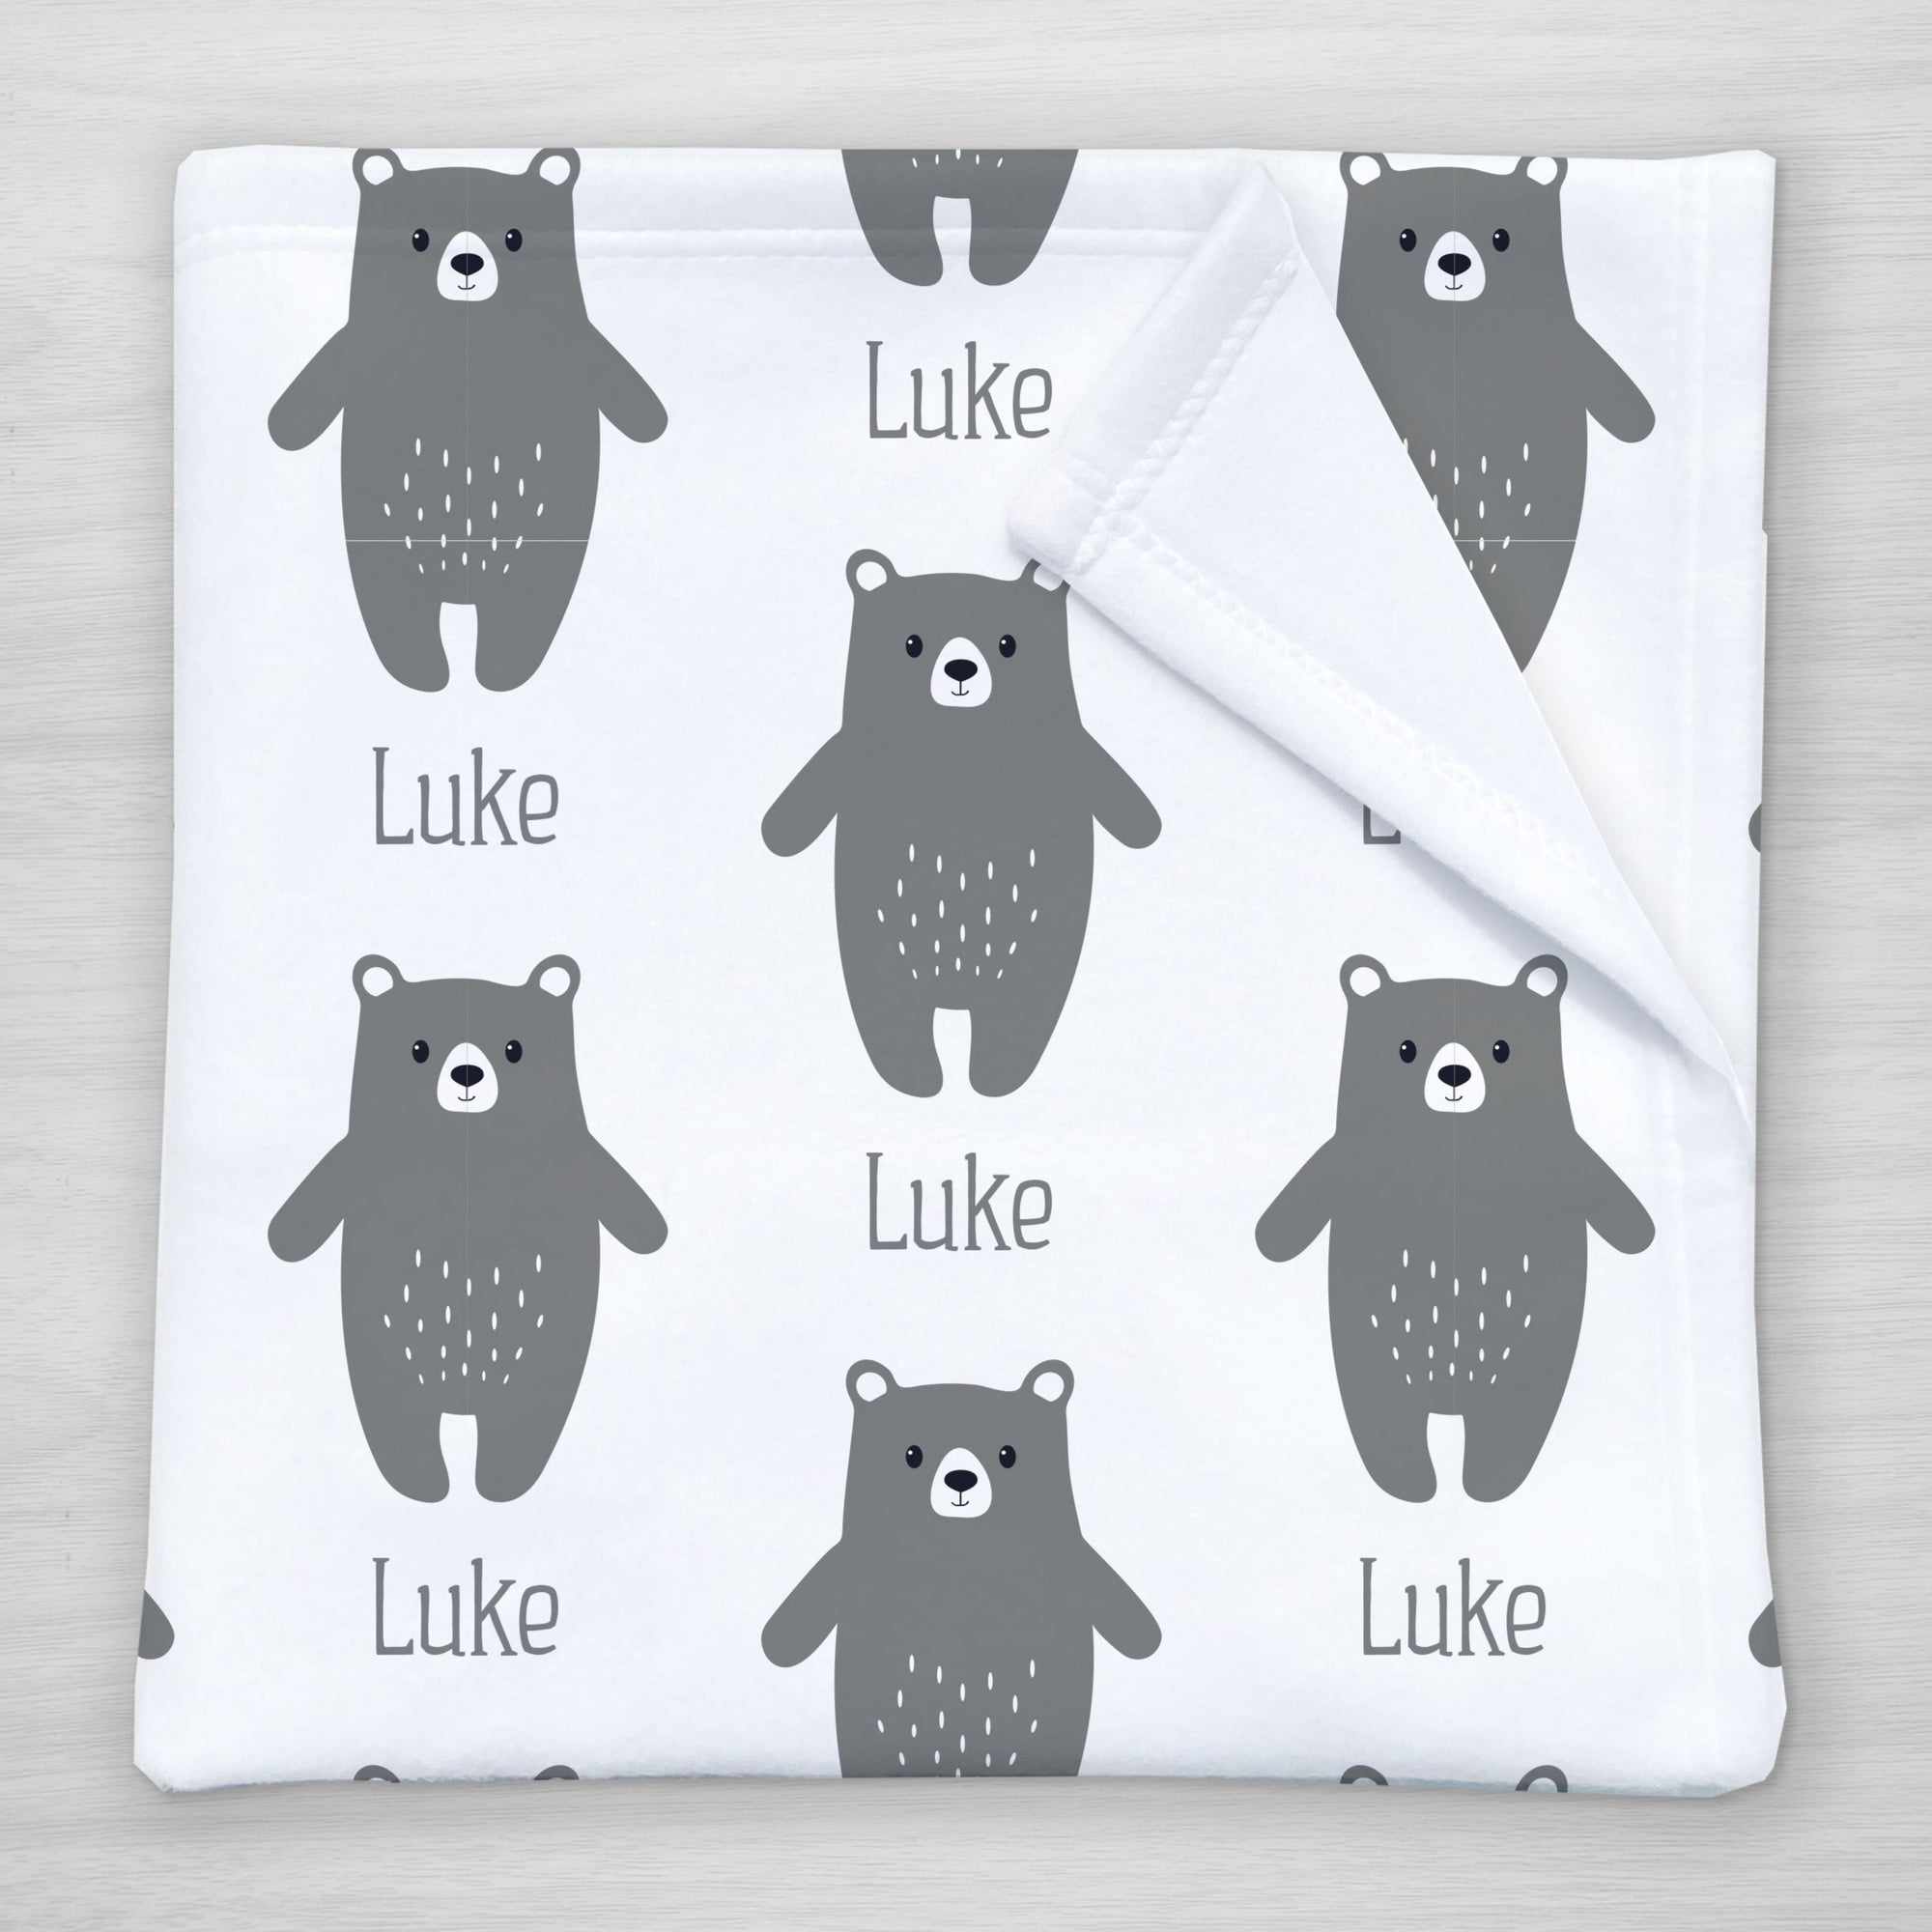 Bear Personalized Baby Blanket with Name, soft fleece